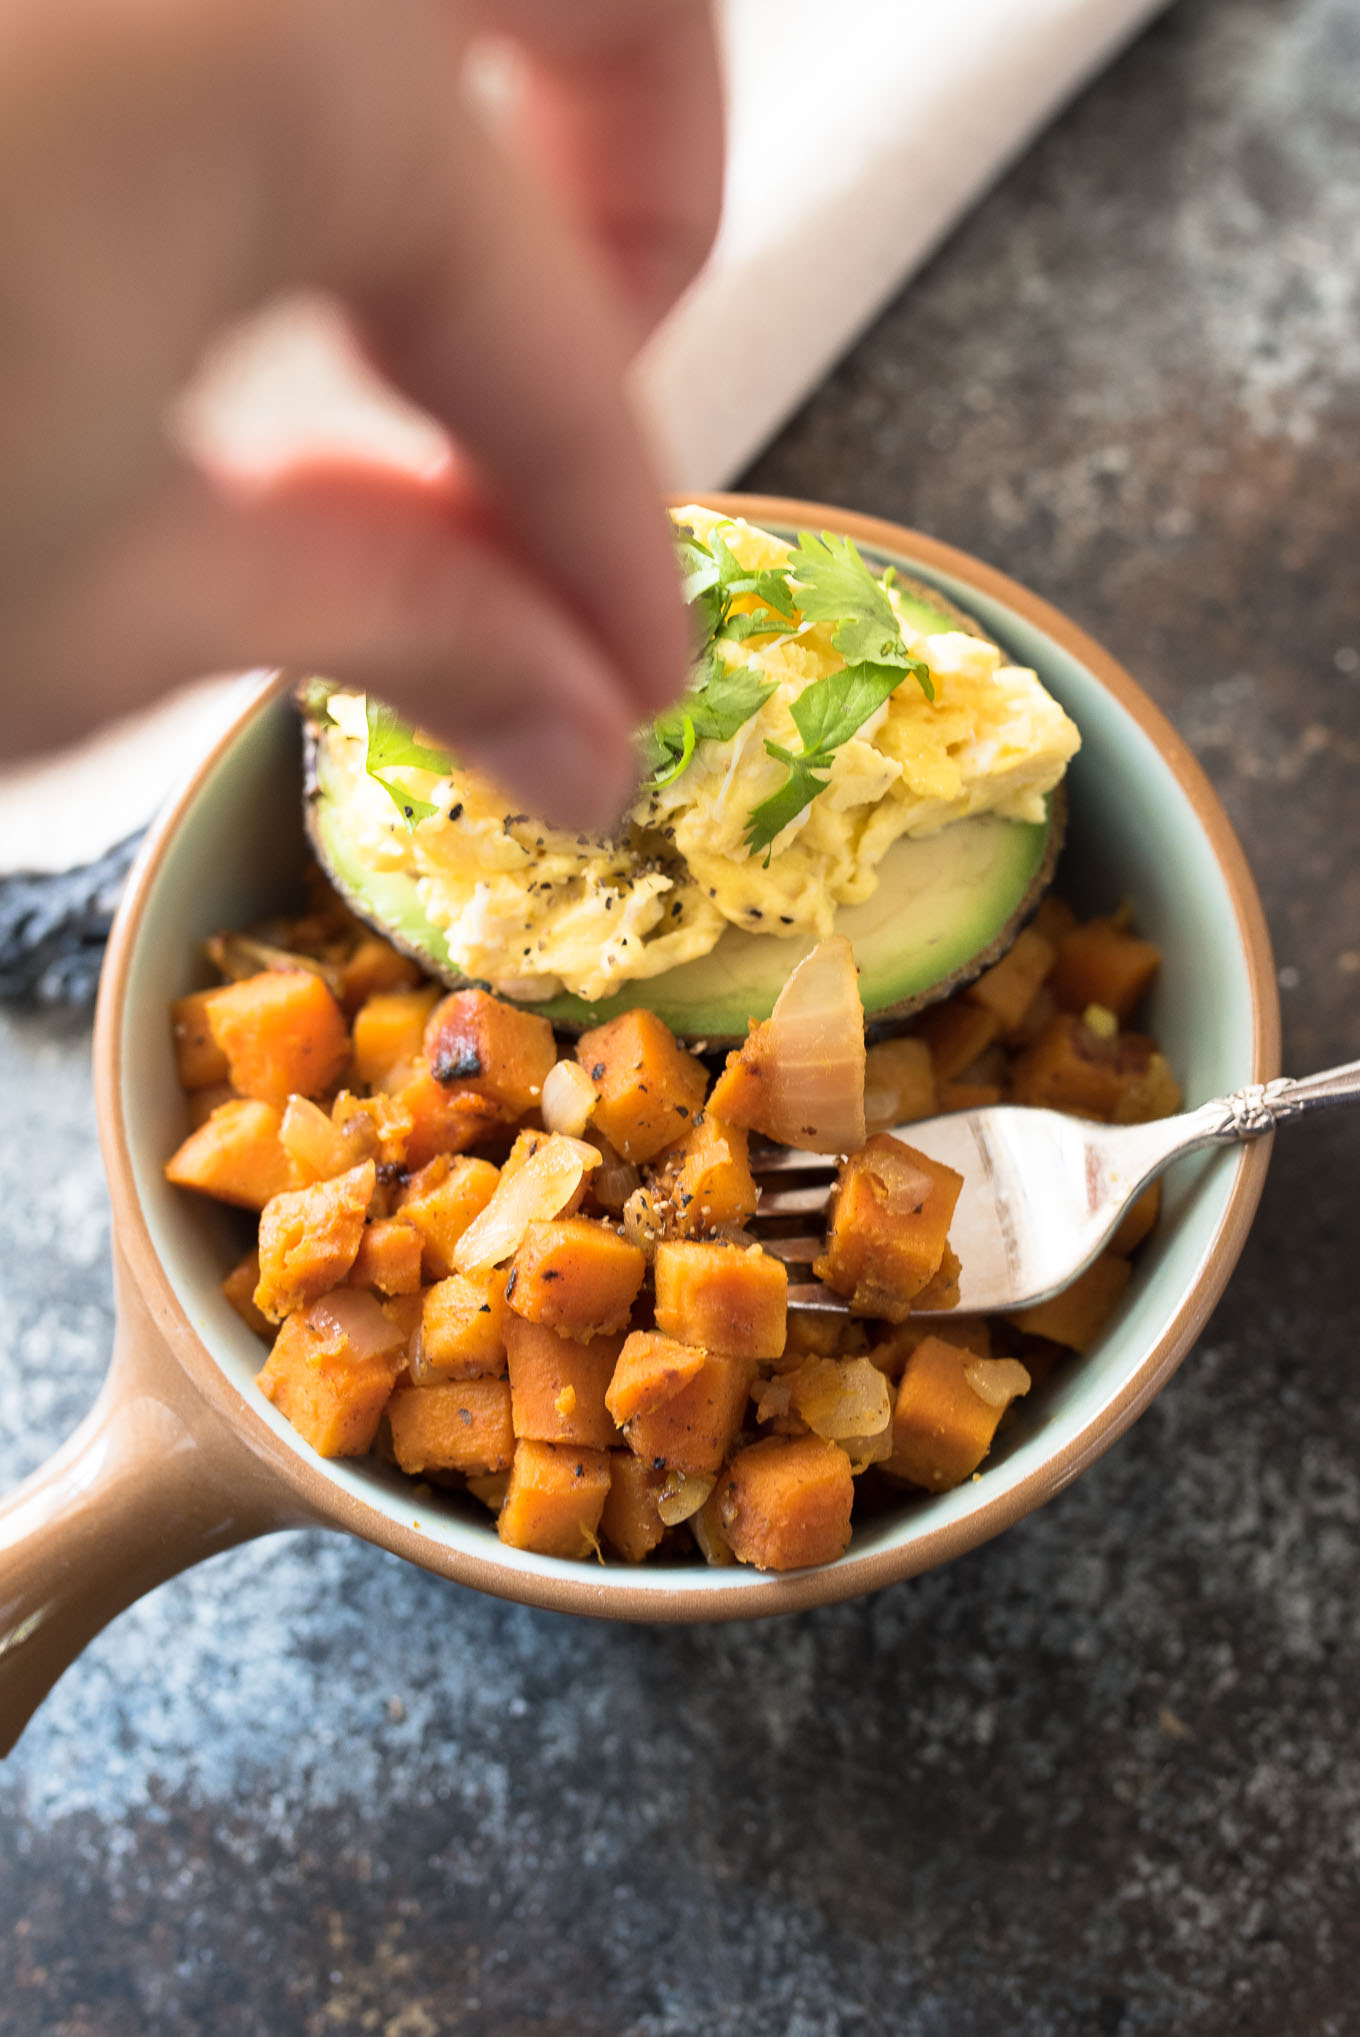 Spiced Sweet Potato Hash with Avocado and Eggs is naturally gluten free, high in fiber and protein and is a budget friendly meal that will nourish you inside and out!